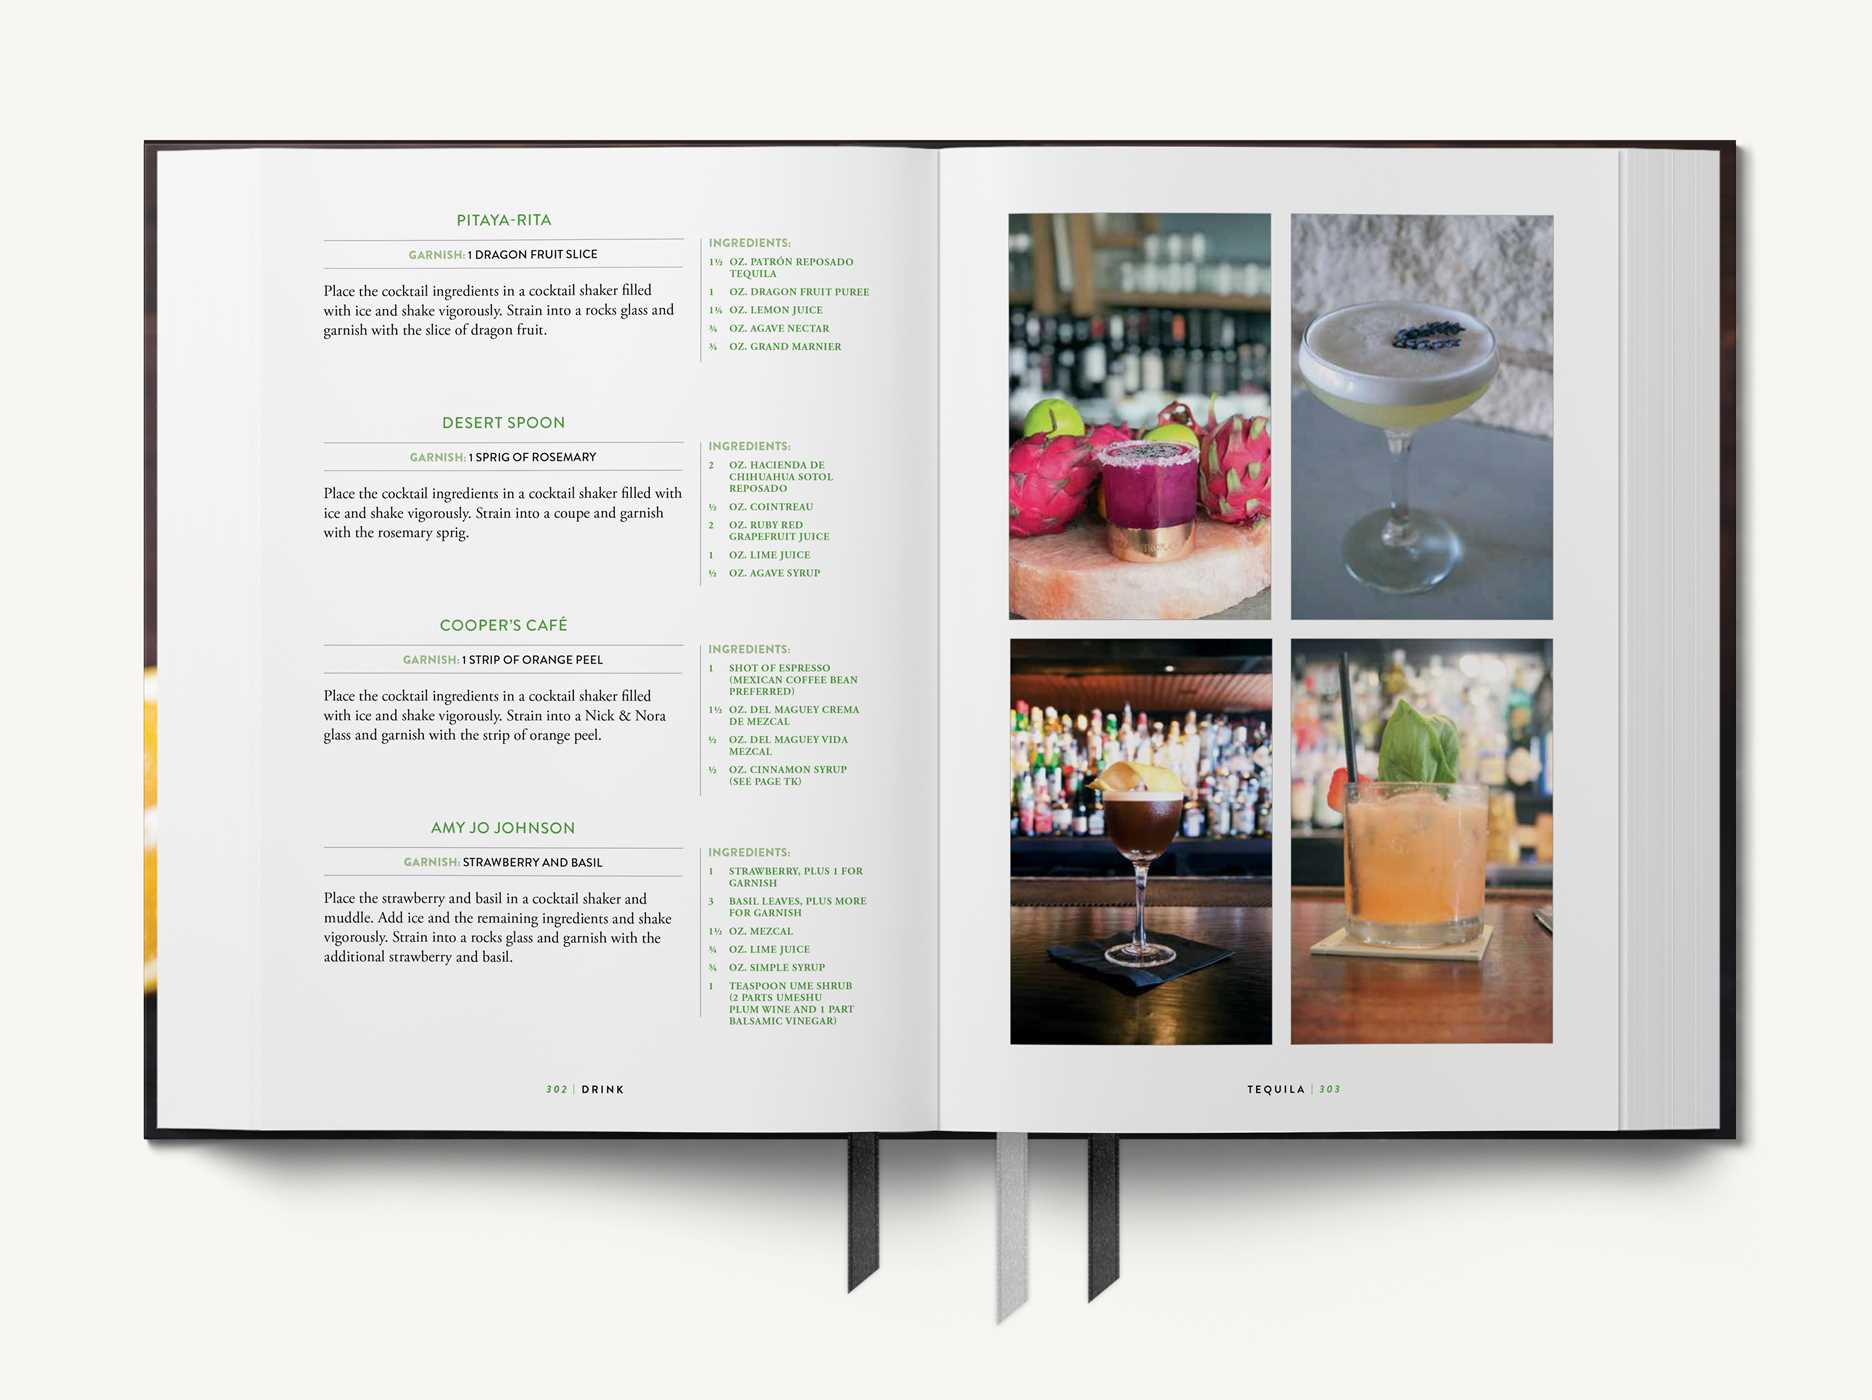 140 Great Cocktail & Mixology Books ideas  cocktail book, cocktail  mixology, mixology